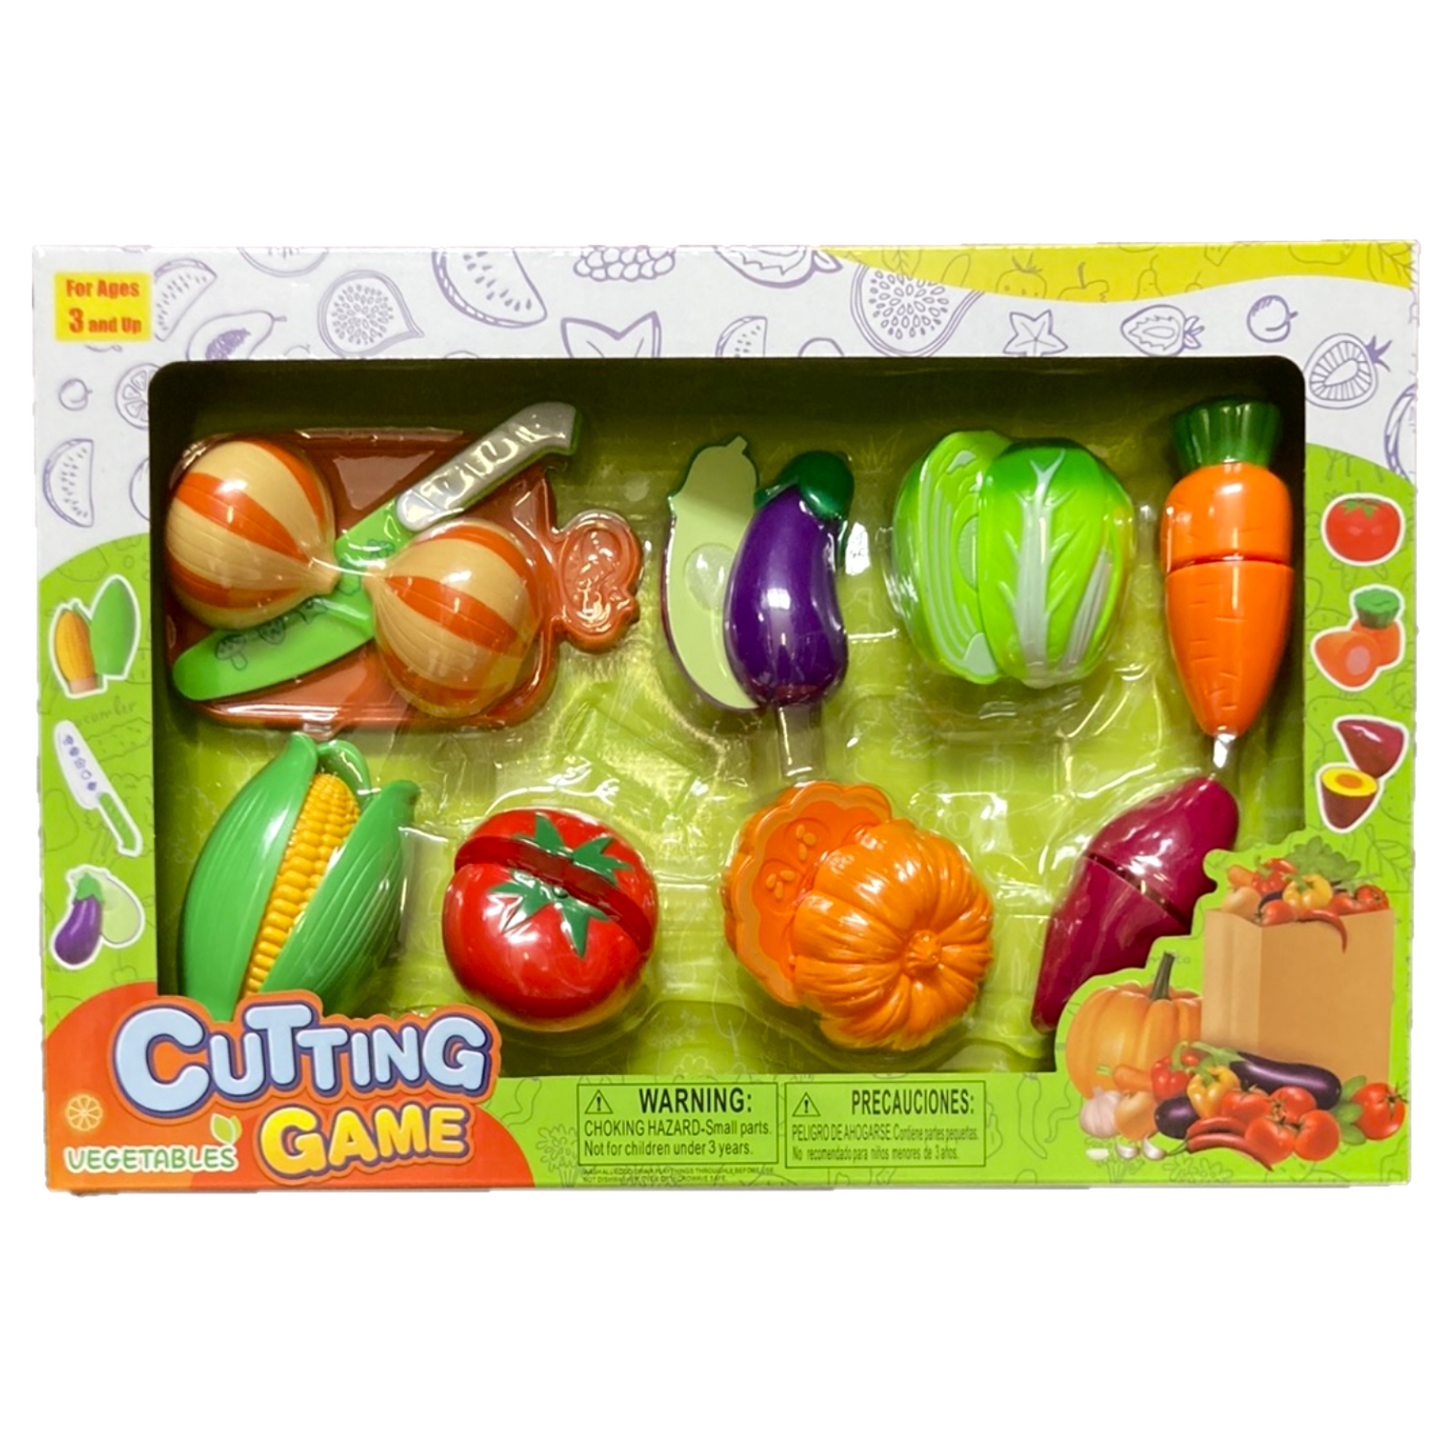 17 PC Vegetable Cutting Game Toy Set